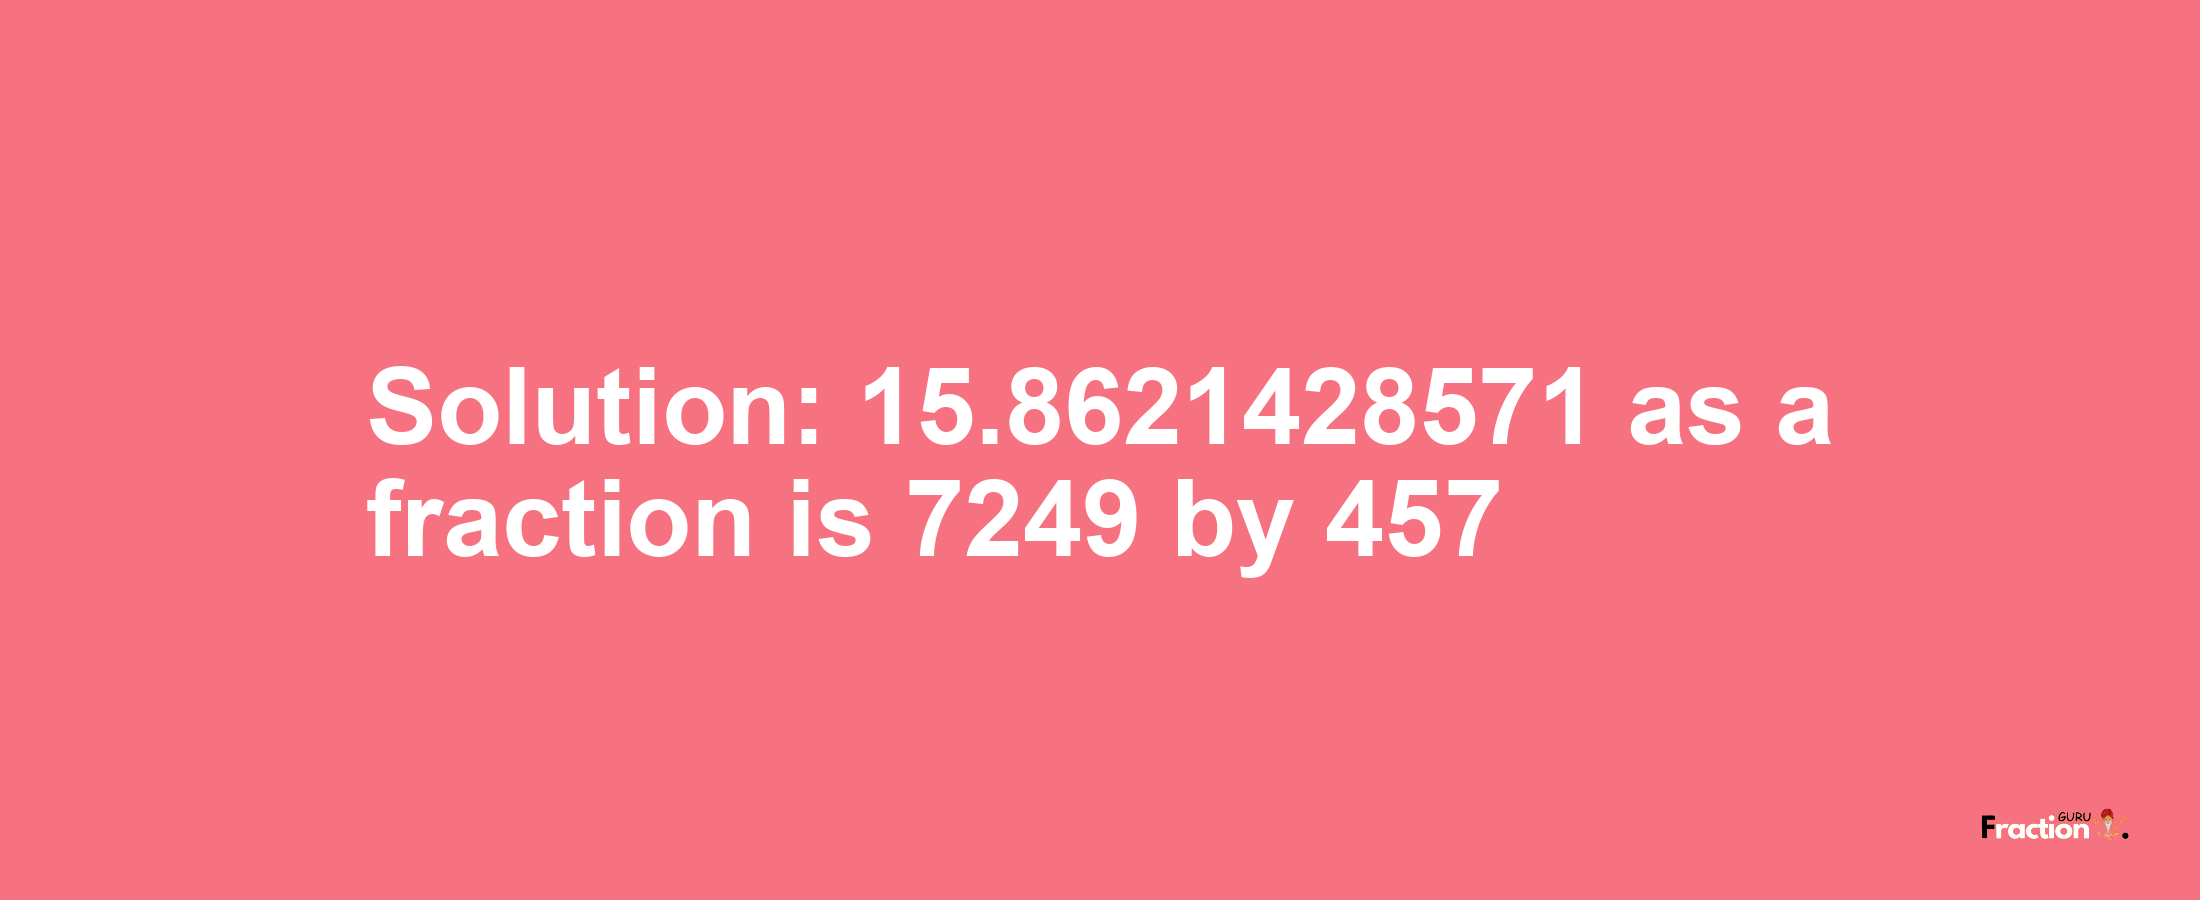 Solution:15.8621428571 as a fraction is 7249/457